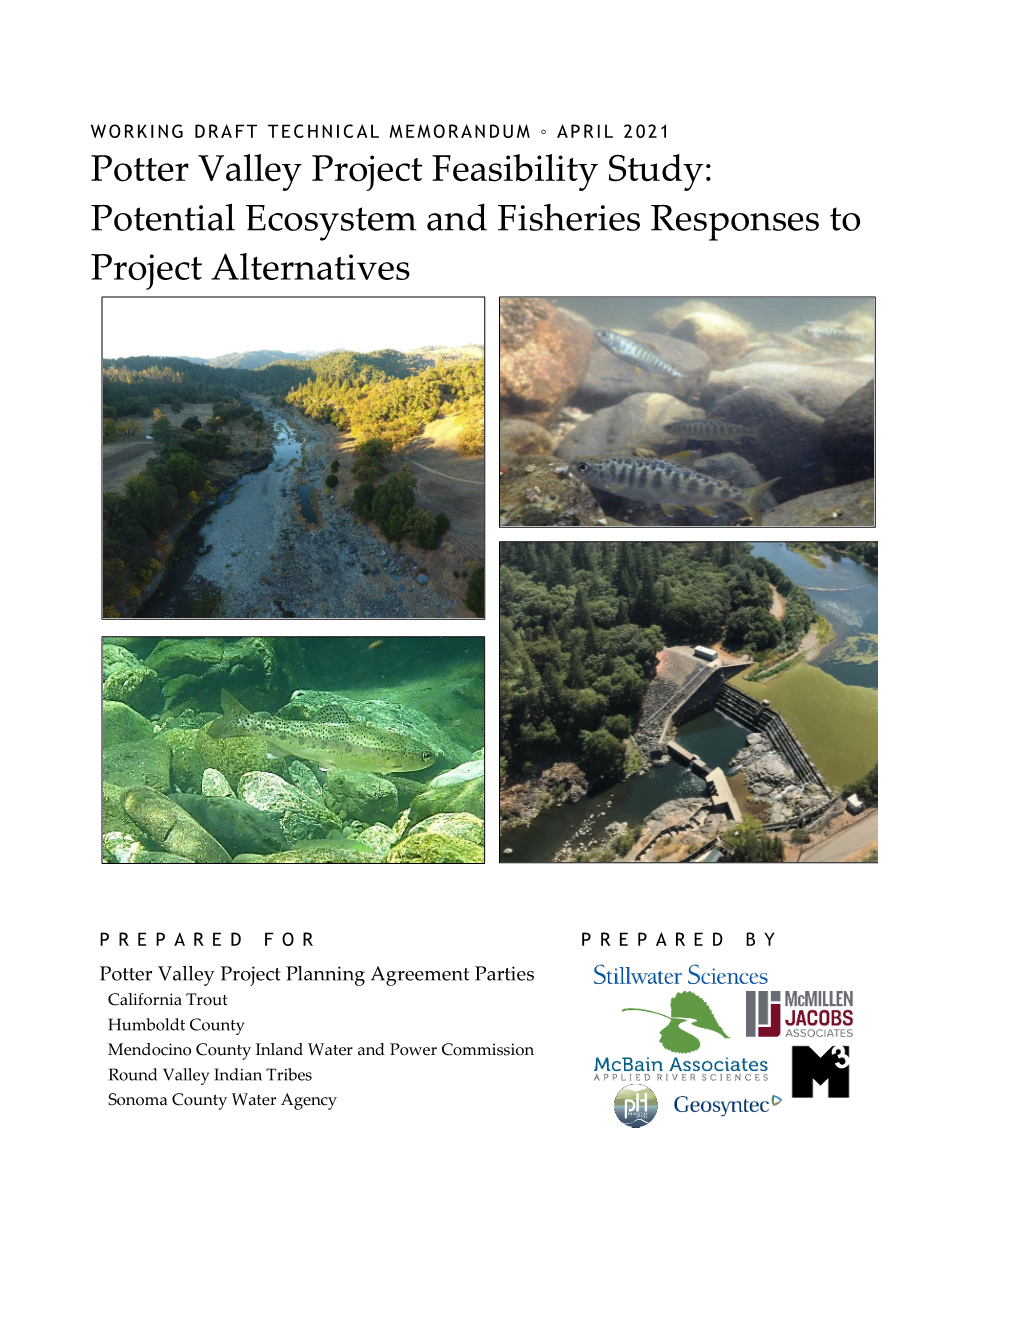 Potter Valley Project Feasibility Study: Potential Ecosystem and Fisheries Responses To